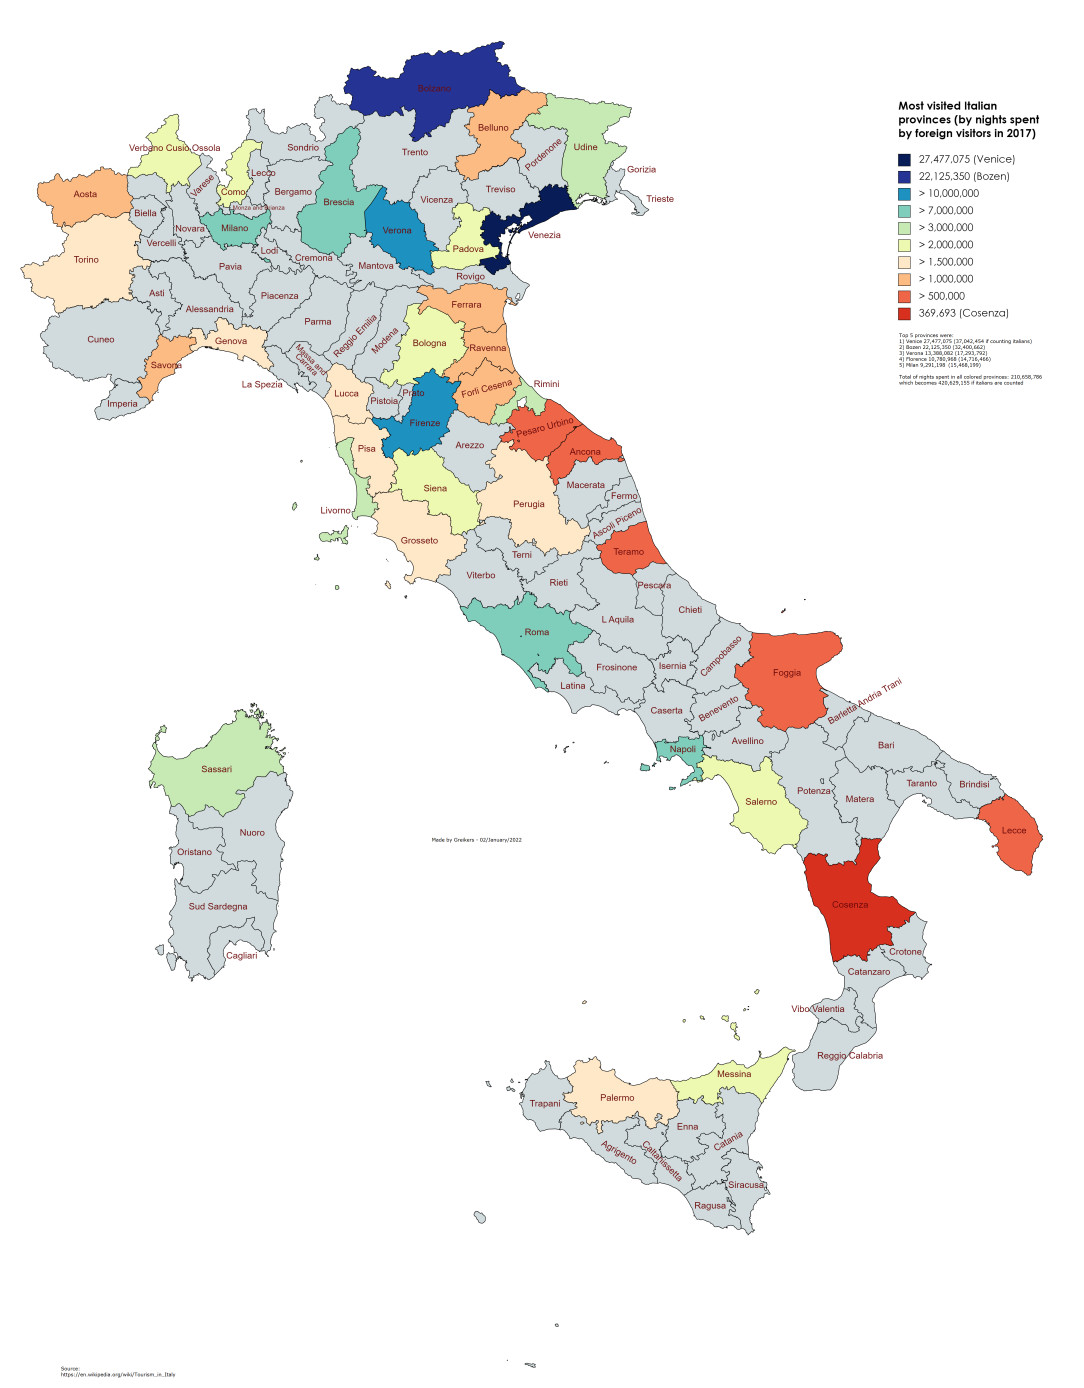 Those are the most visited provinces of Italy. Source in the picture